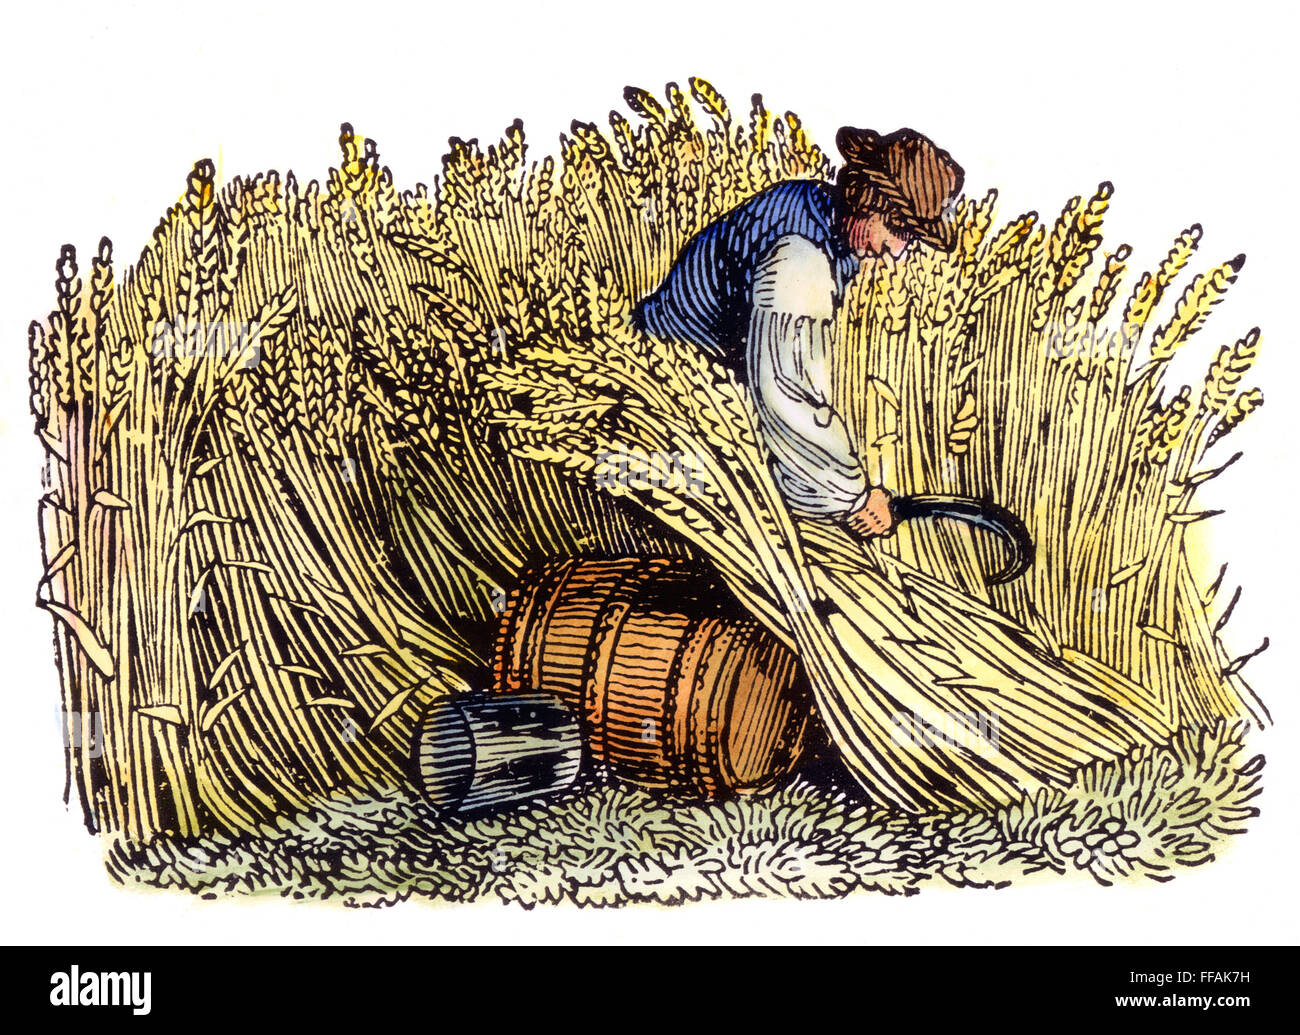 FARMING: HARVESTING, c1800. /nReaping with a sickle: wood engraving, English, c1800. Stock Photo